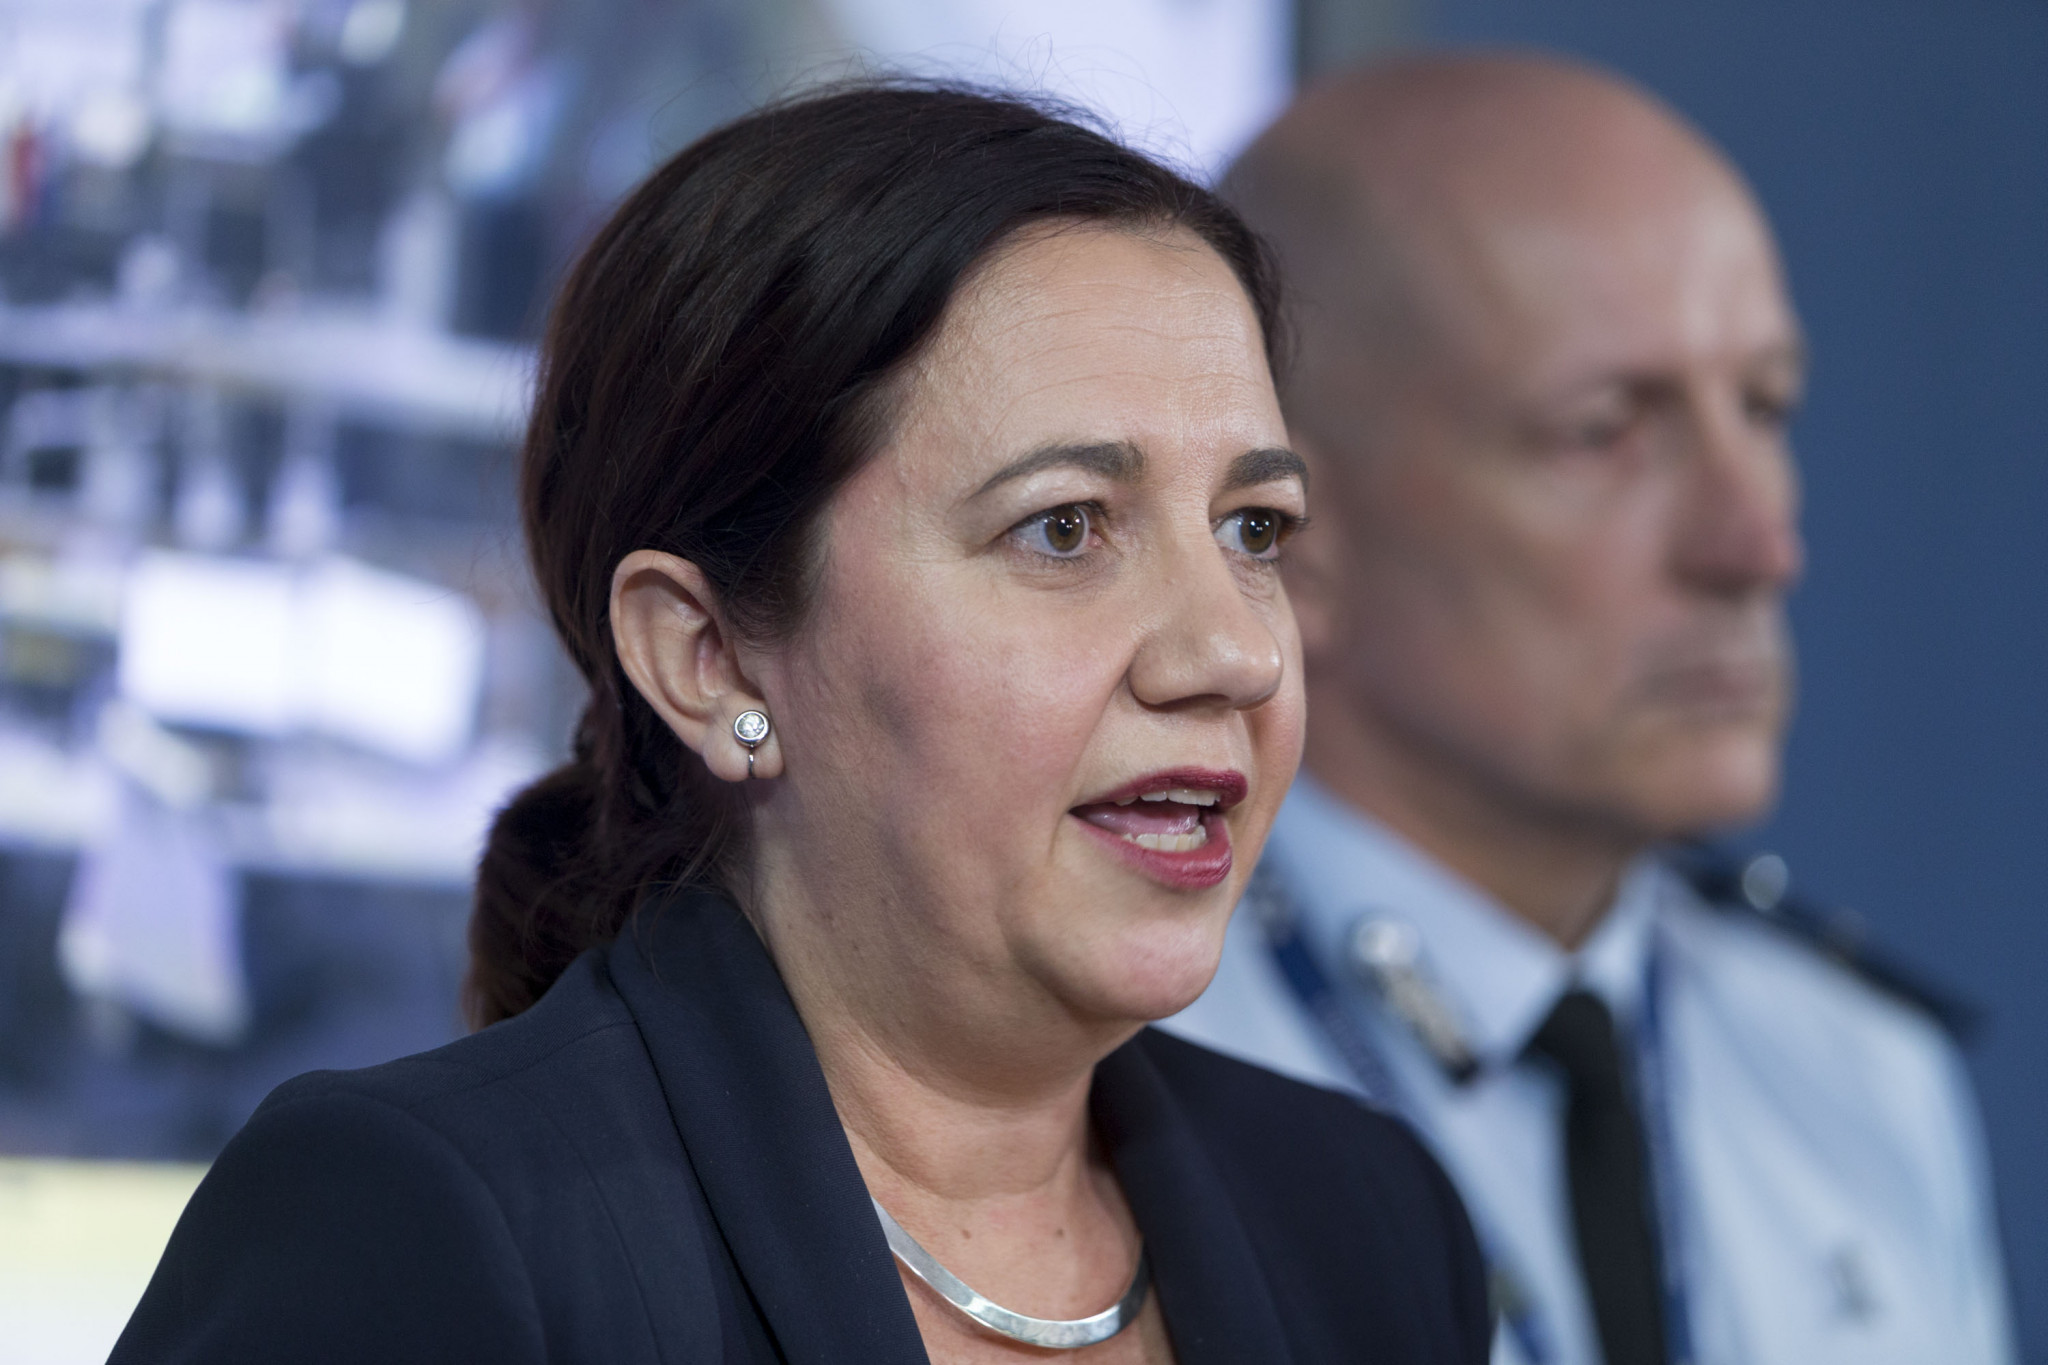 Annastacia Palaszczuk has been tipped to win a second term as Queensland Premier ©Getty Images